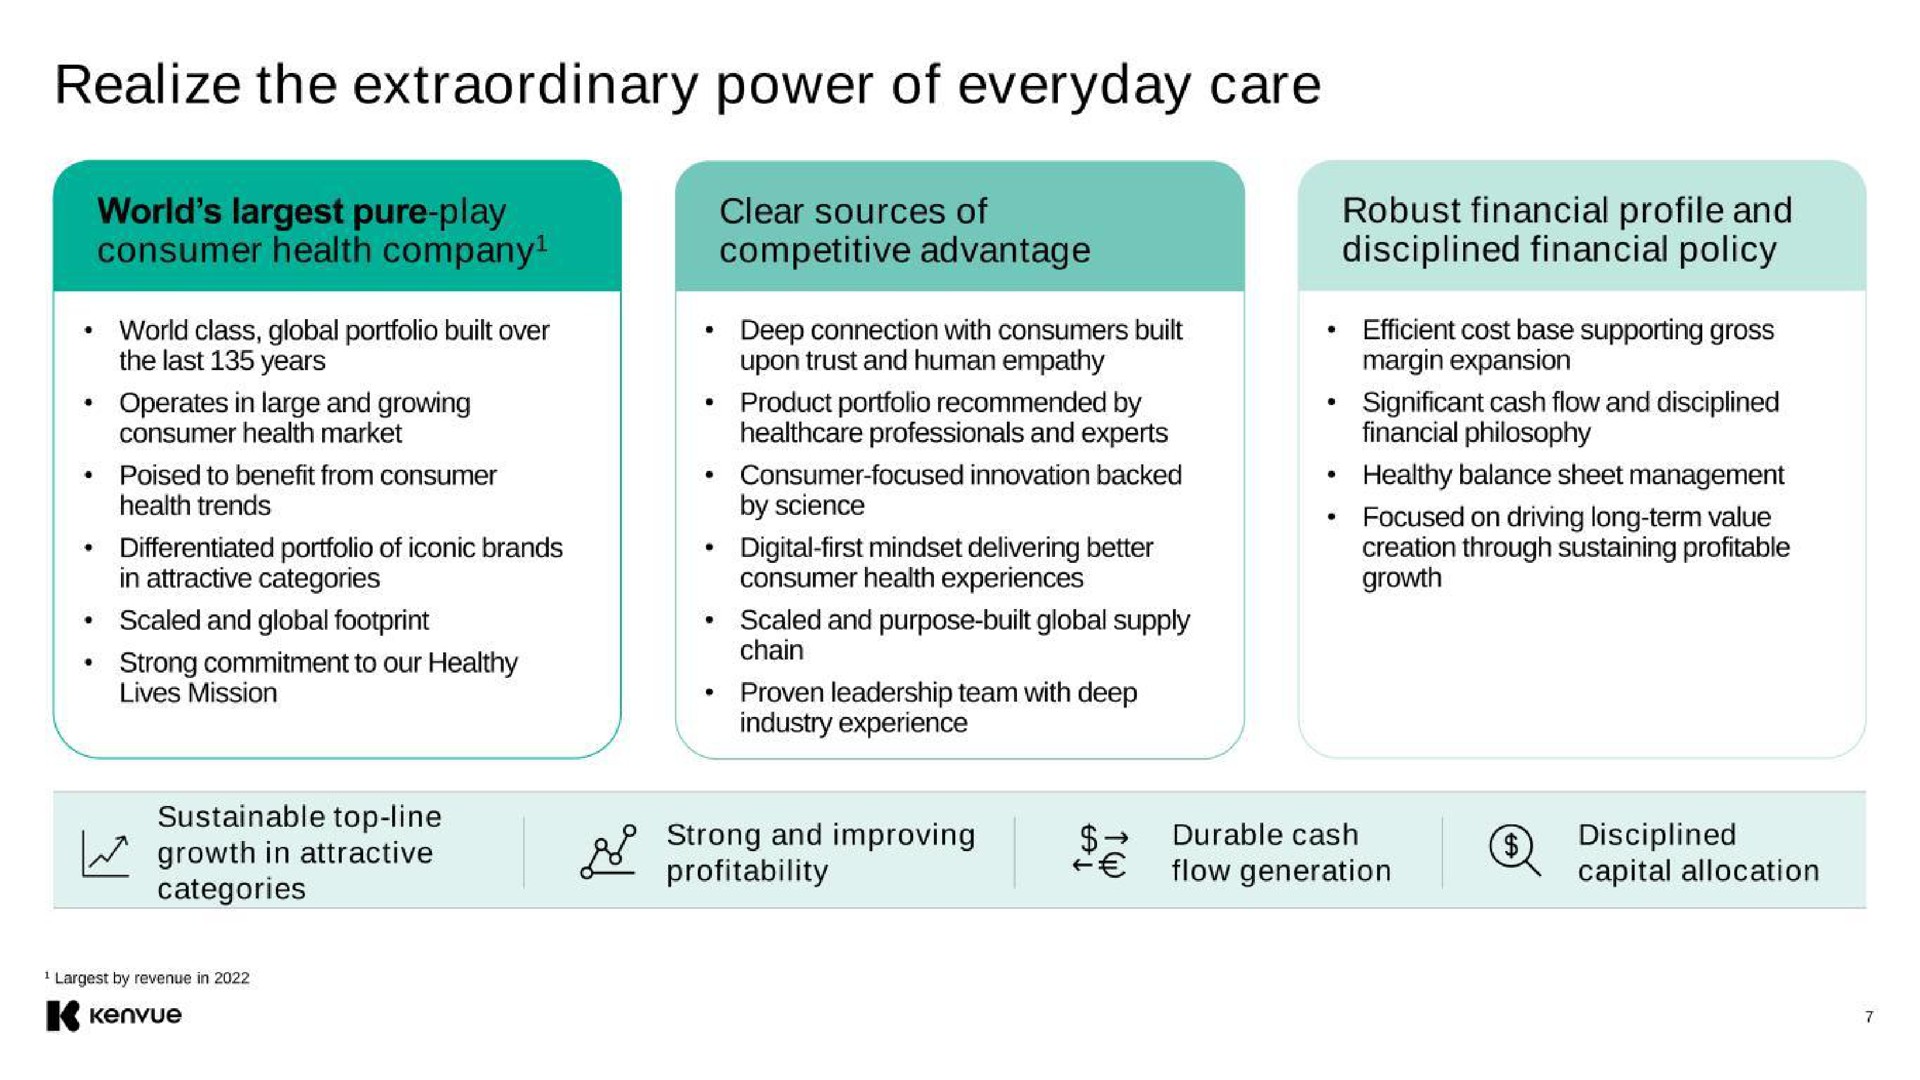 realize the extraordinary power of everyday care ante and preying durable cash disciplined | Kenvue